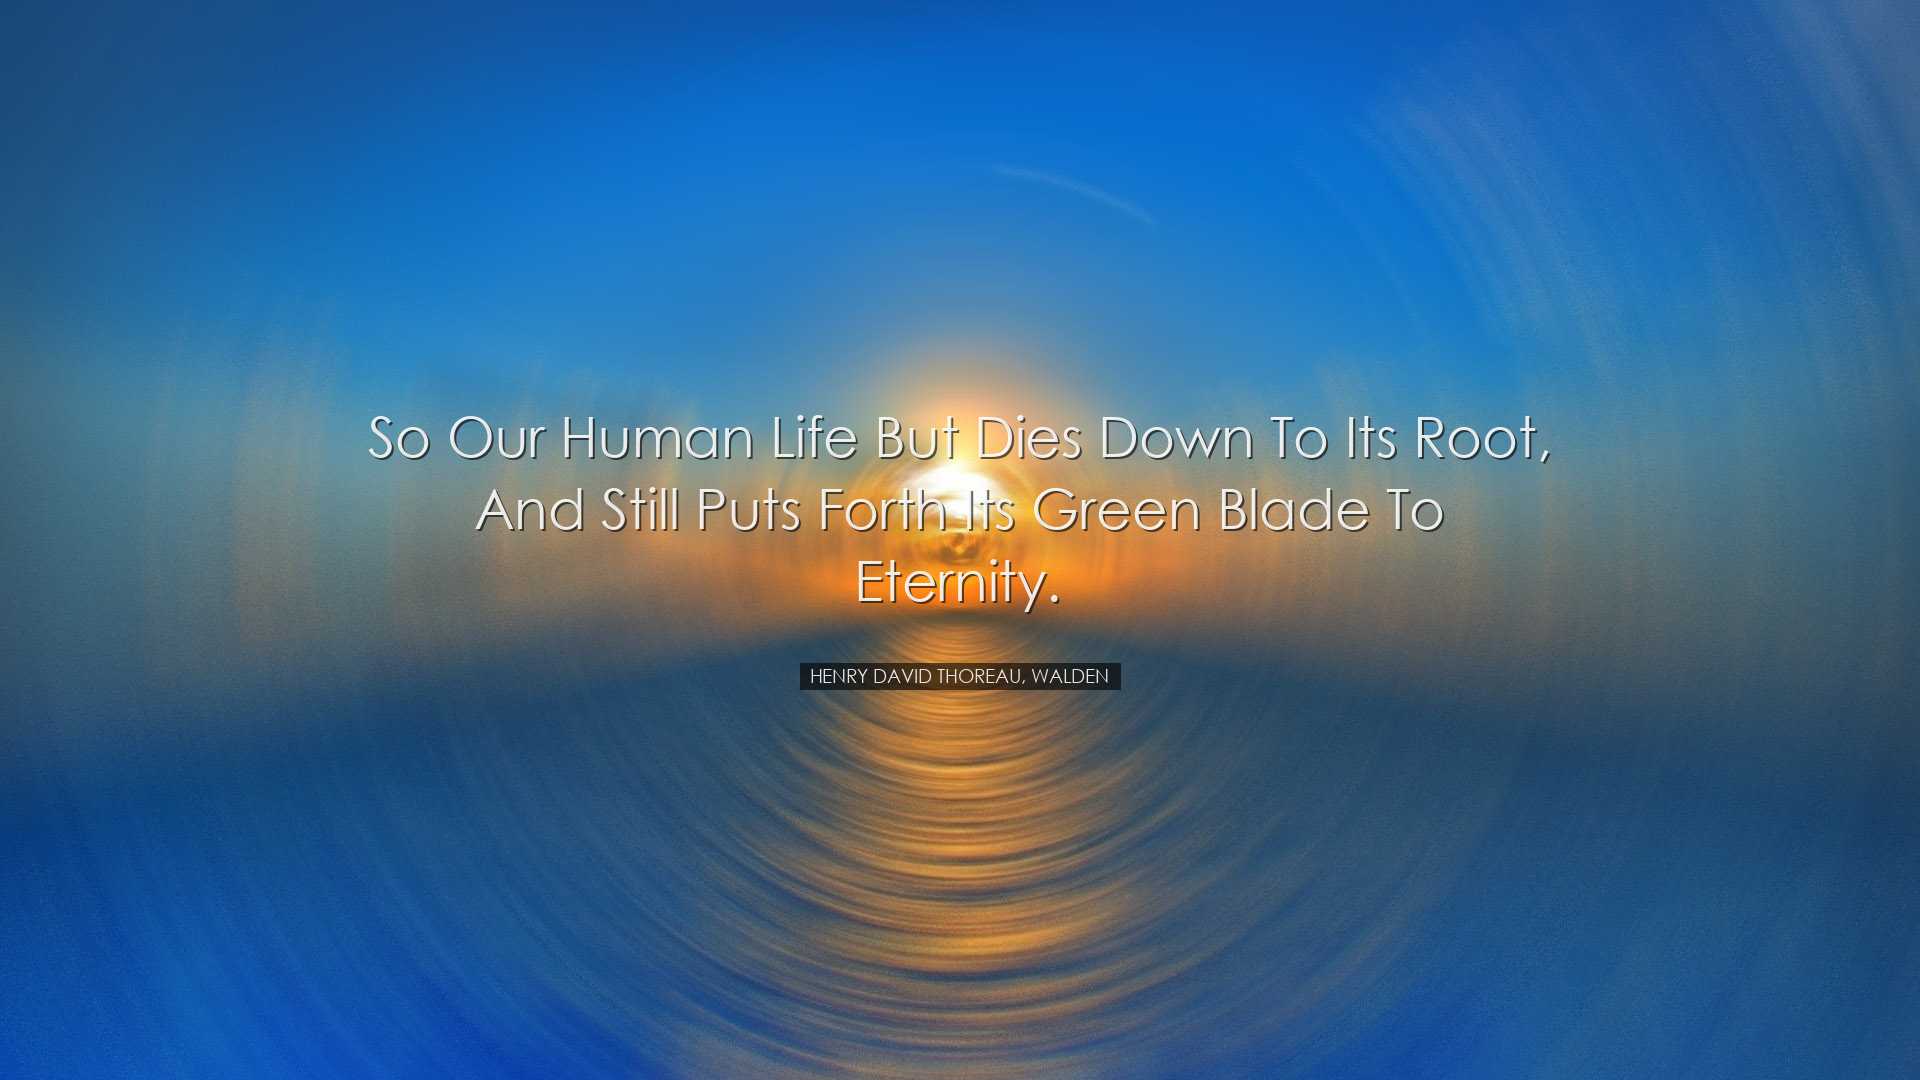 So our human life but dies down to its root, and still puts forth